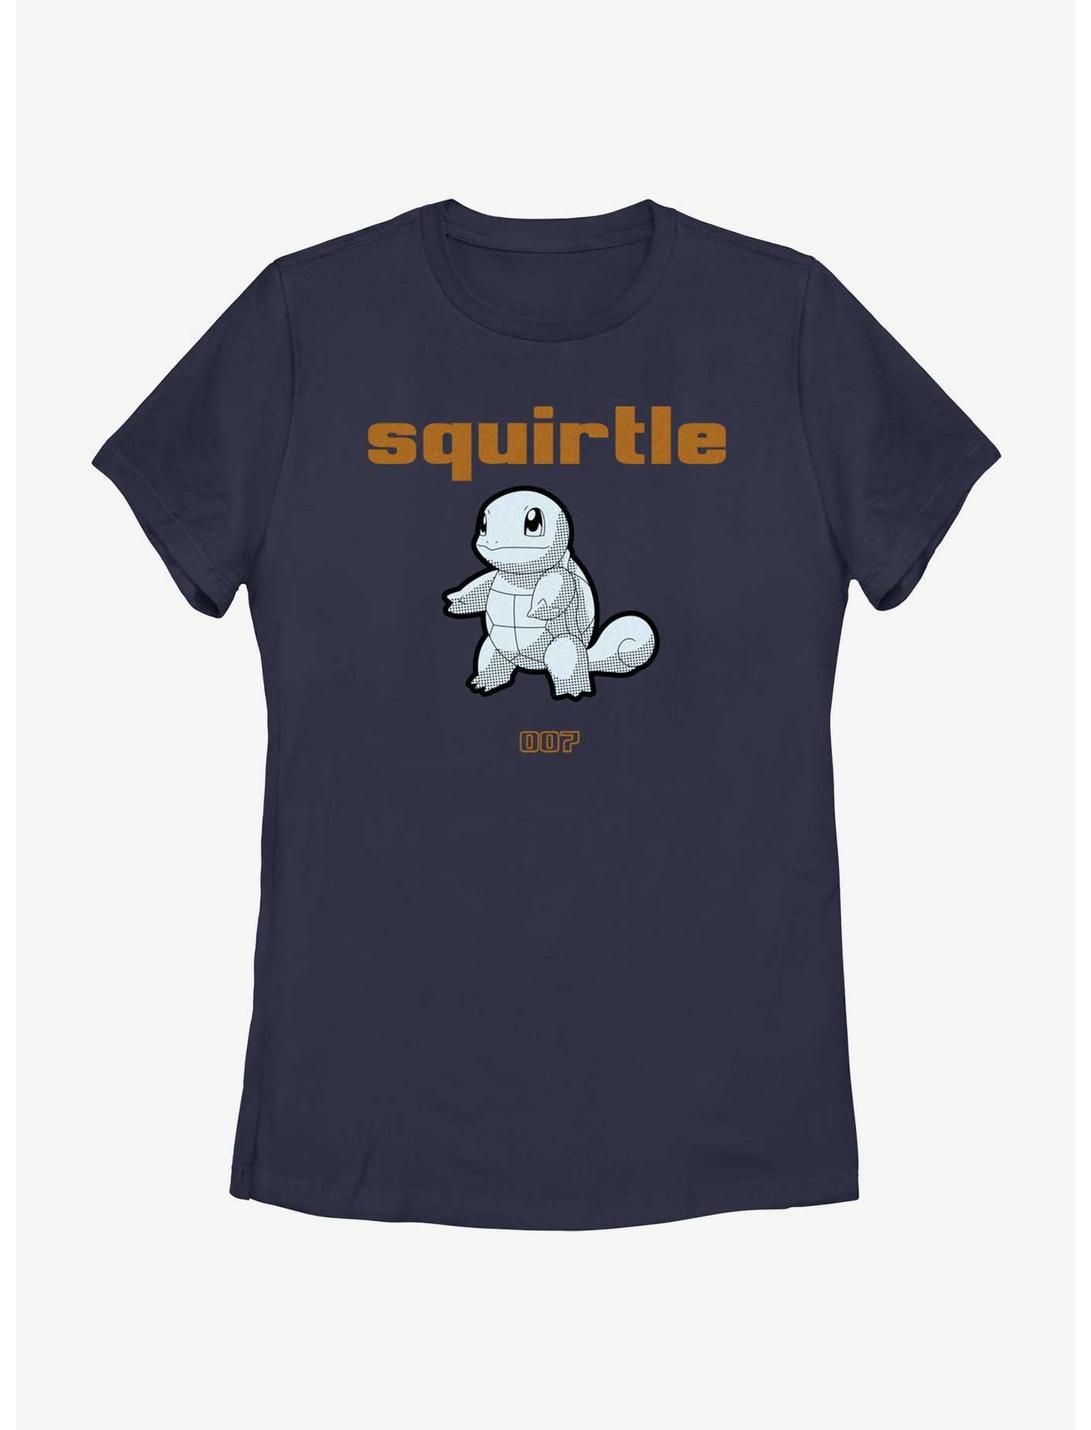 Pokemon Squirtle 007 Womens T-Shirt, NAVY, hi-res